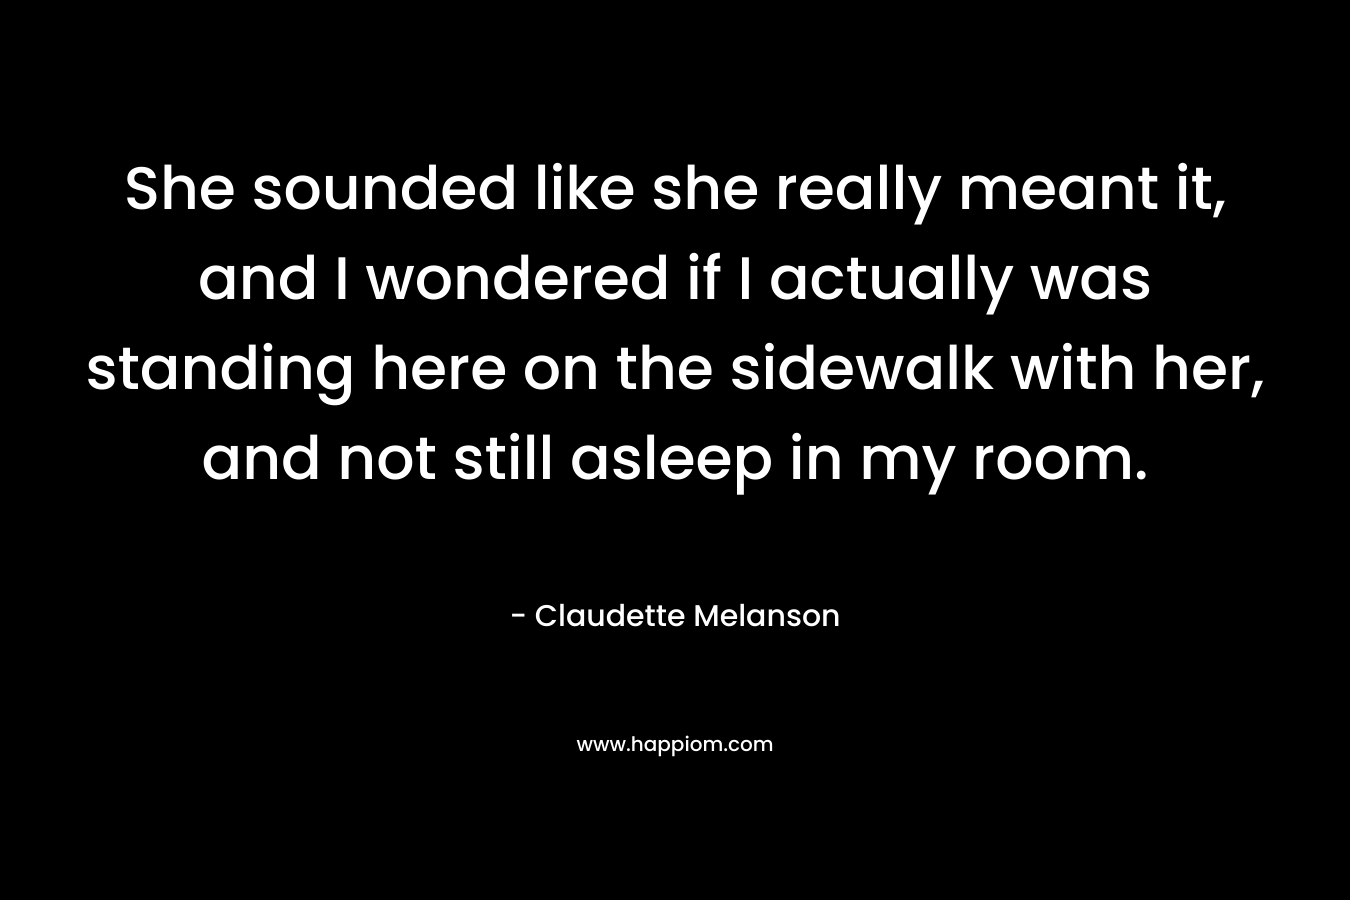 She sounded like she really meant it, and I wondered if I actually was standing here on the sidewalk with her, and not still asleep in my room. – Claudette Melanson